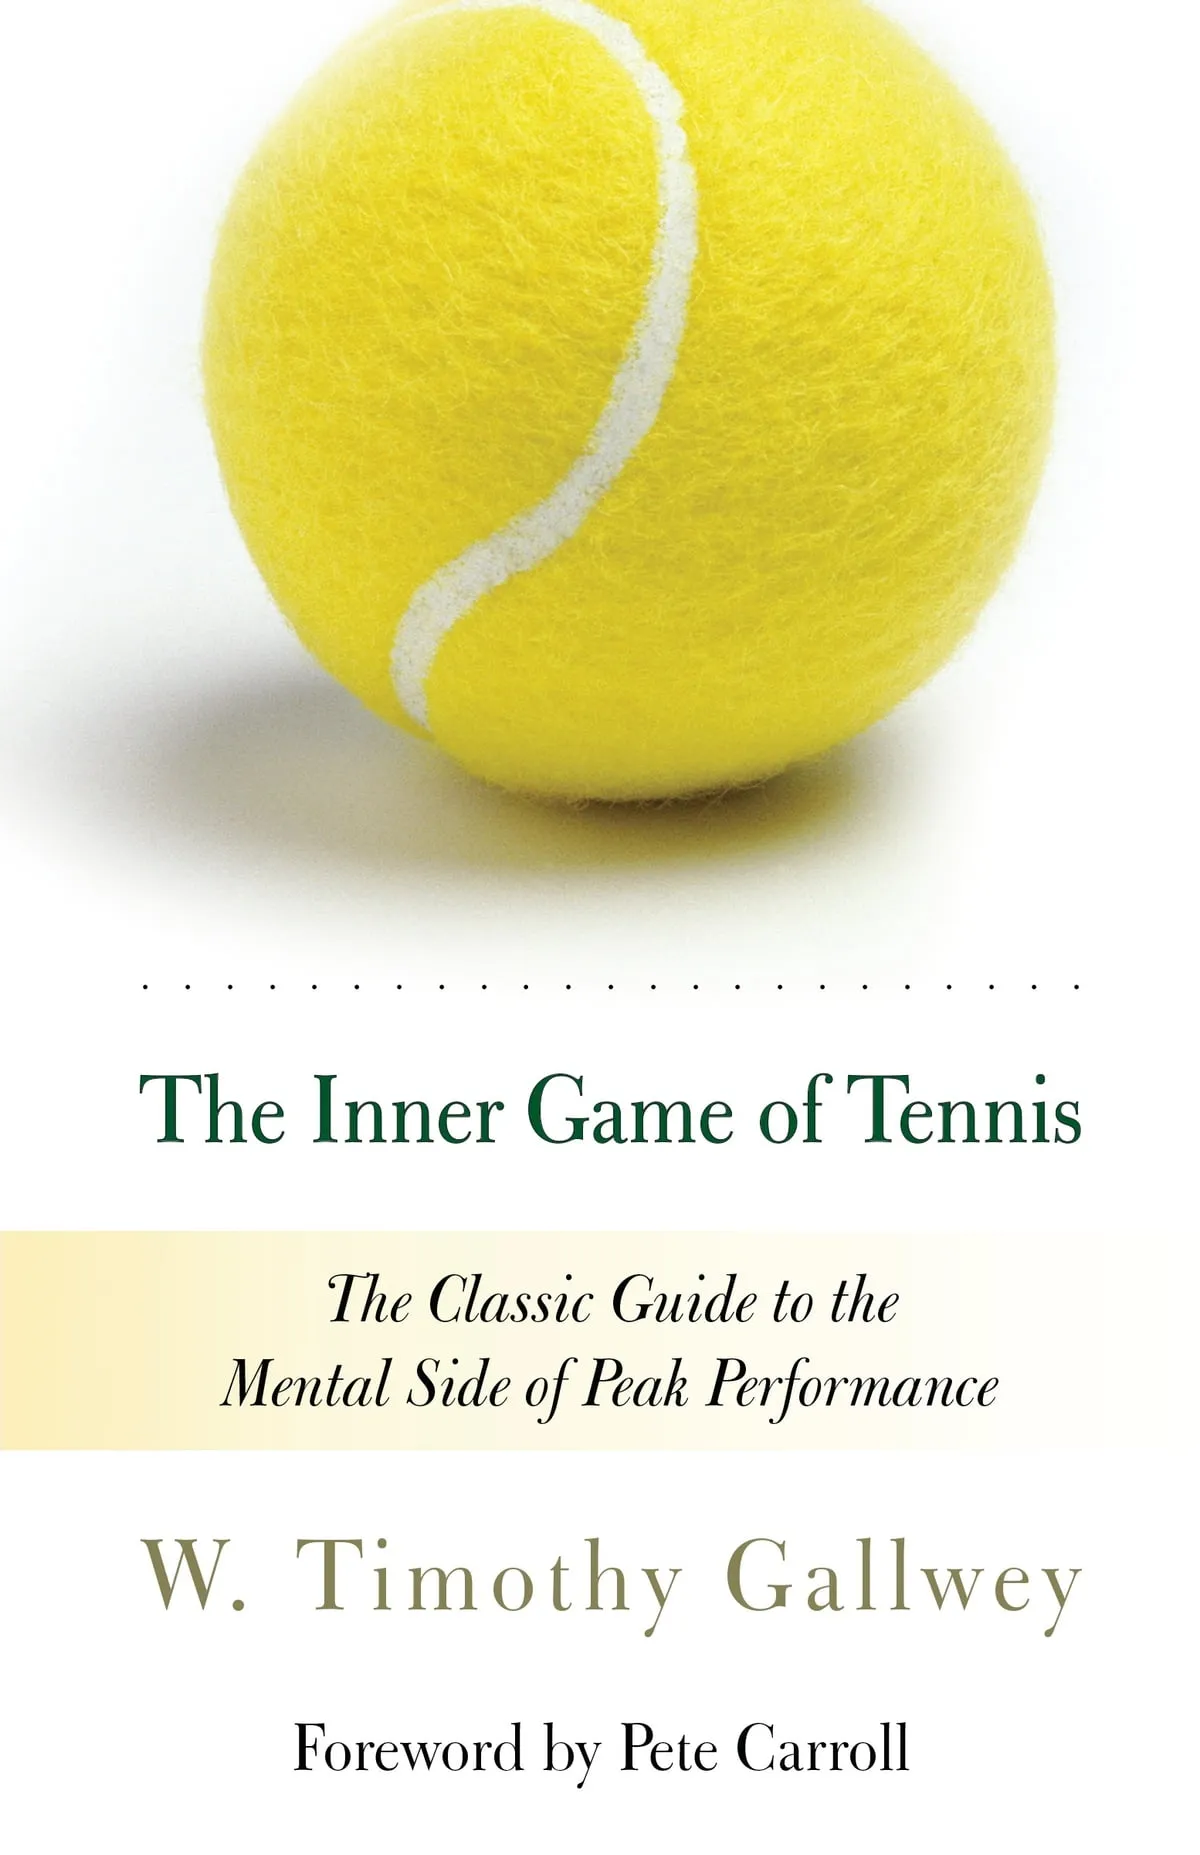 Cover of the book title The Inner Game of Tennis